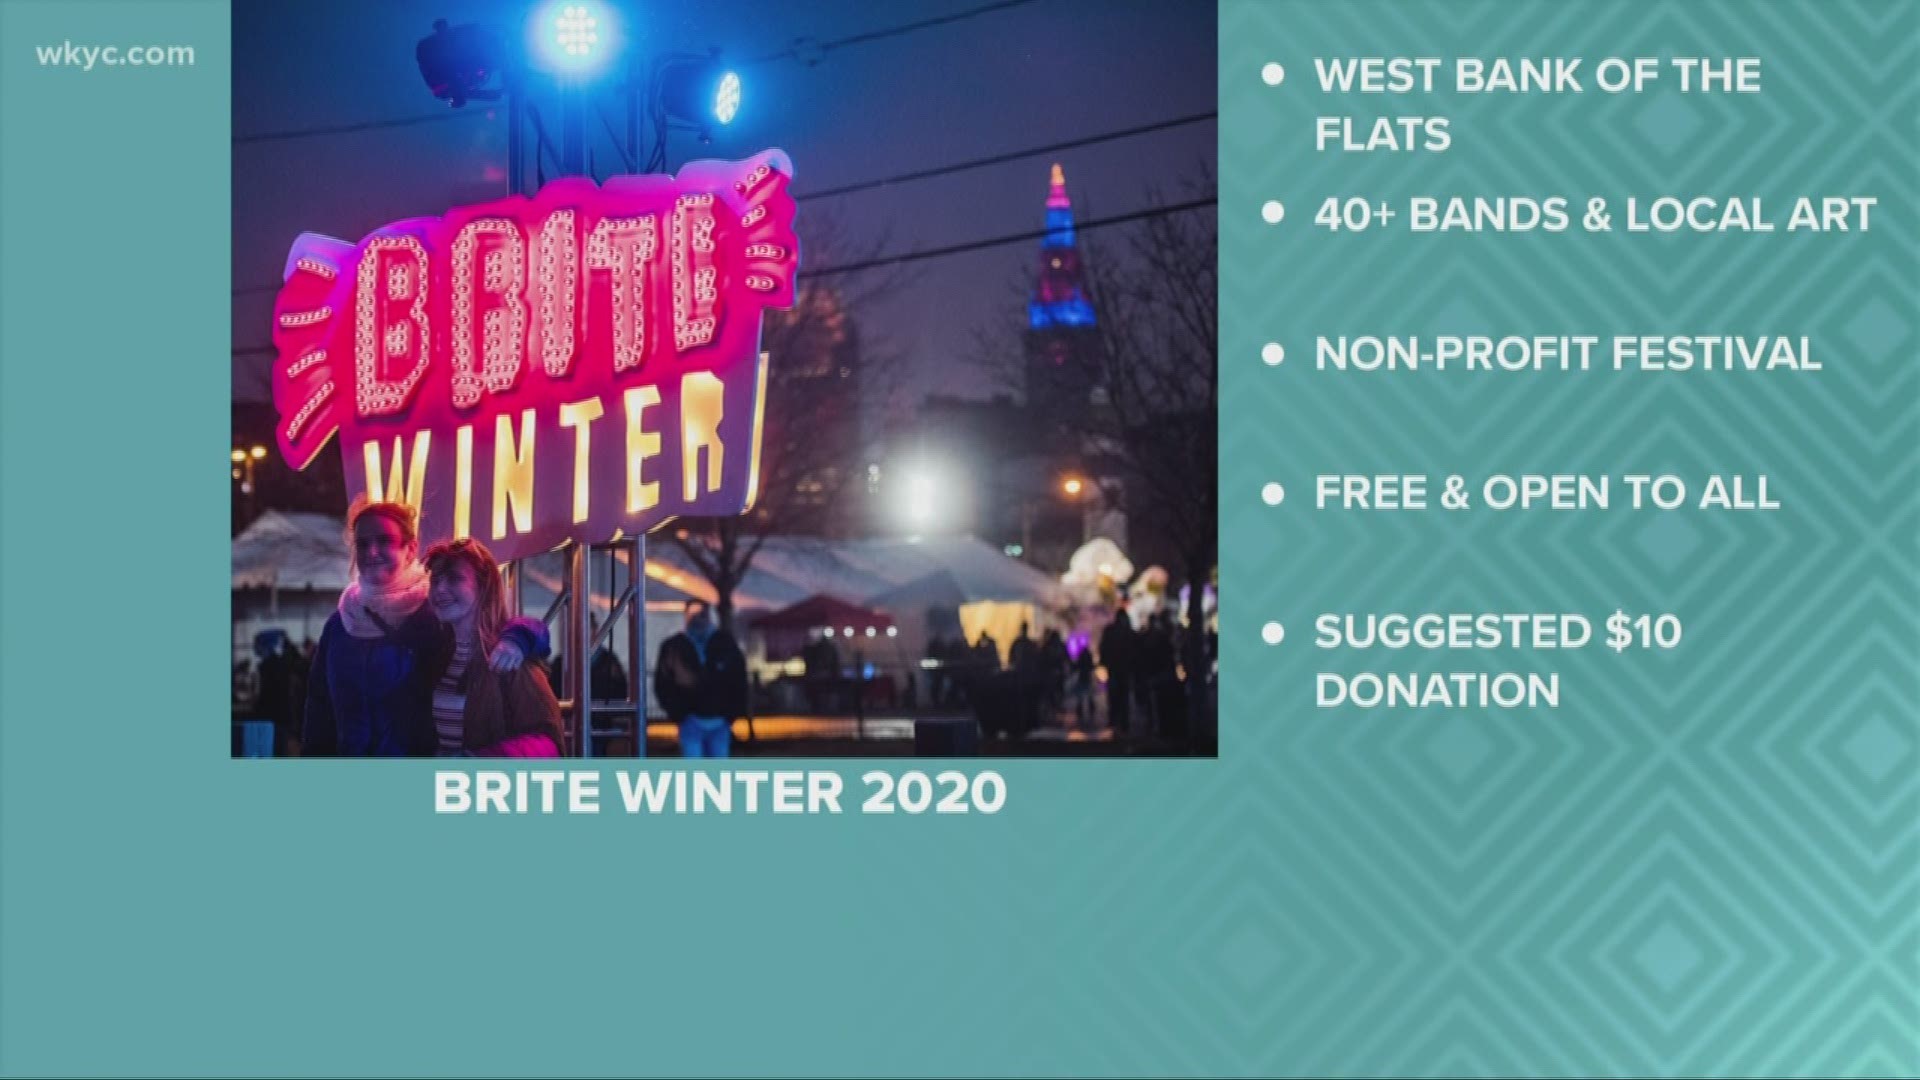 Annual Brite Winter Fest features art, music, fire and fun